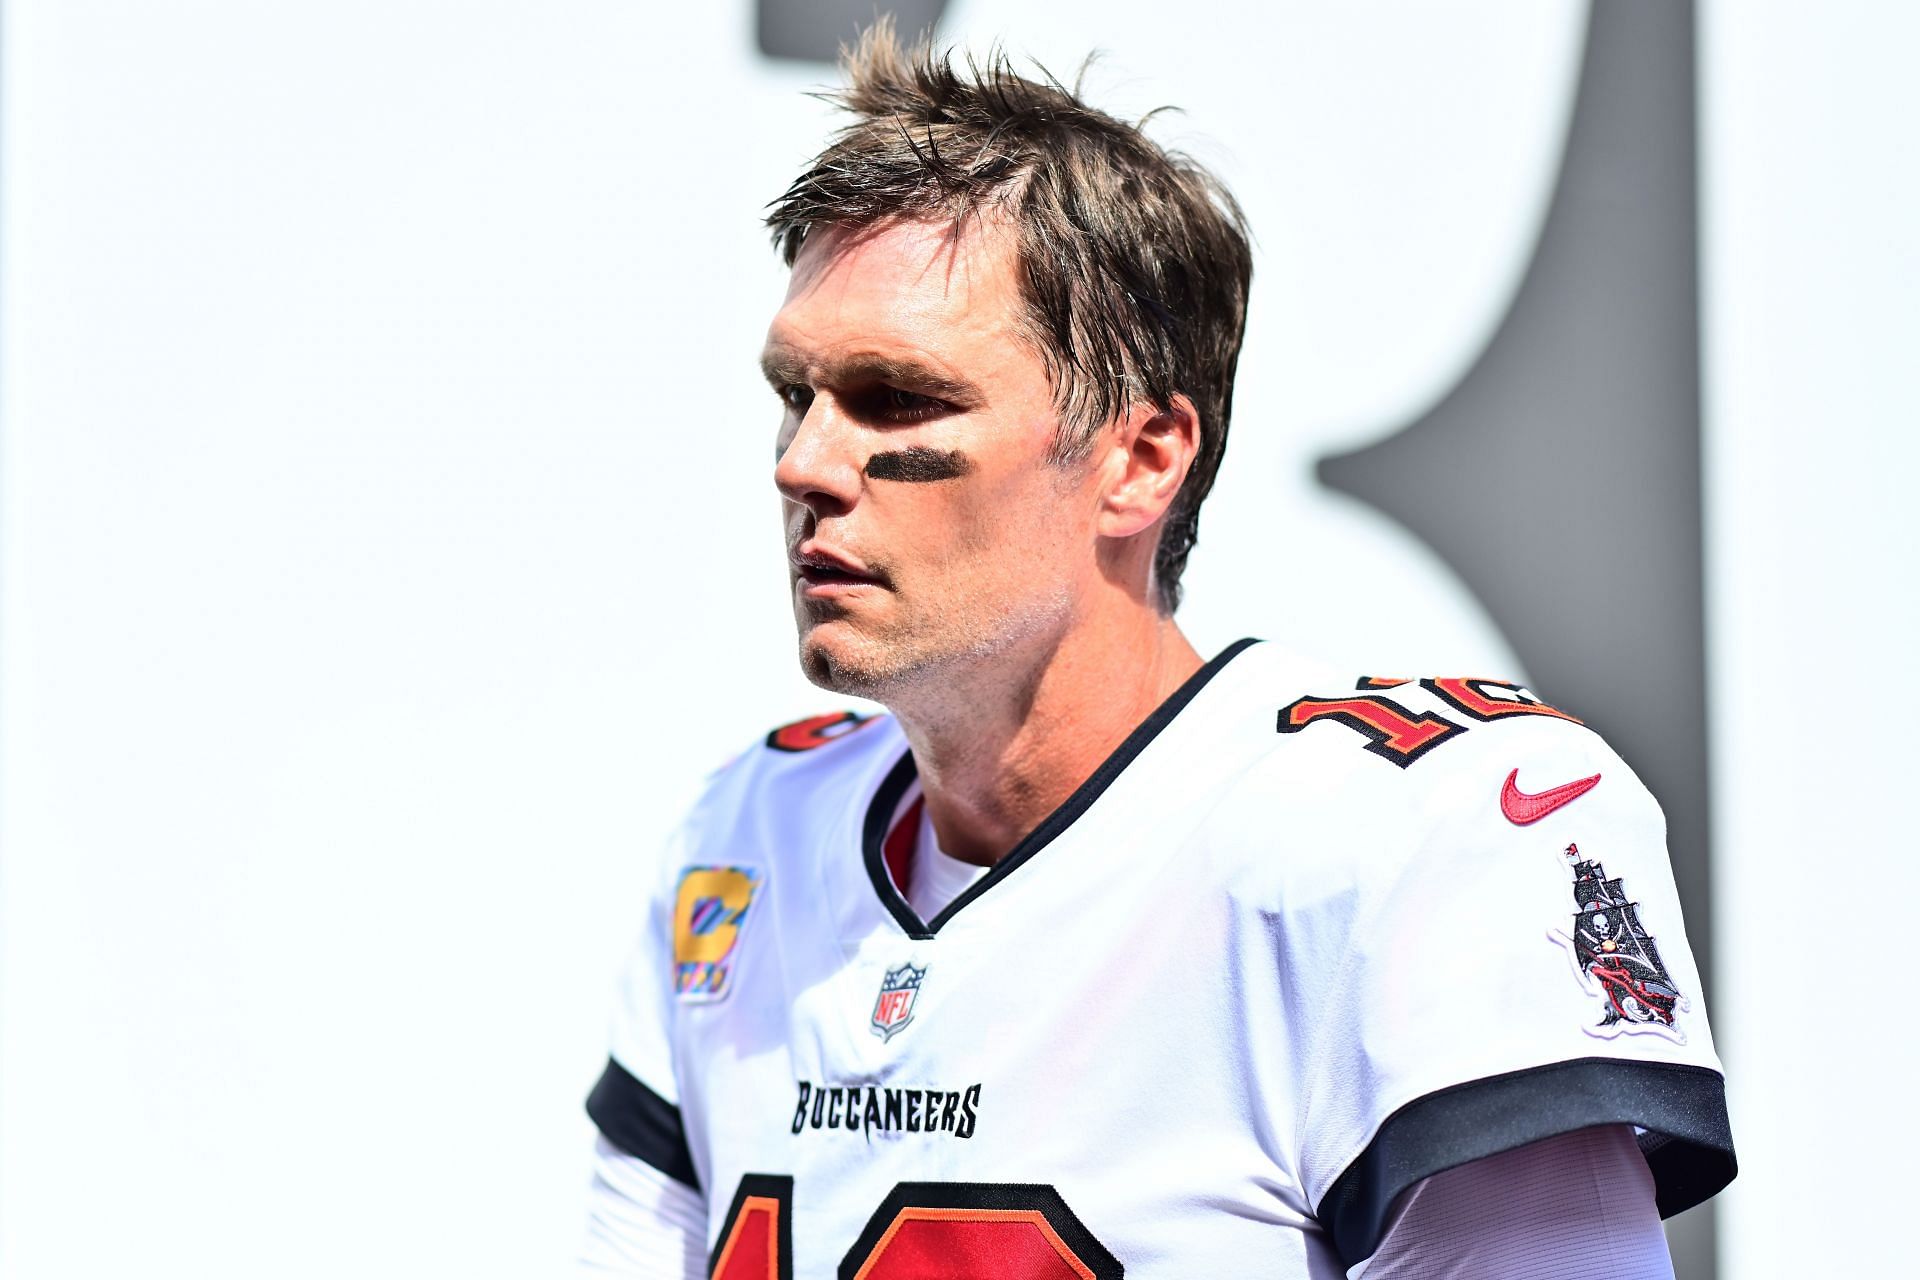 Tom Brady of the Tampa Bay Buccaneers